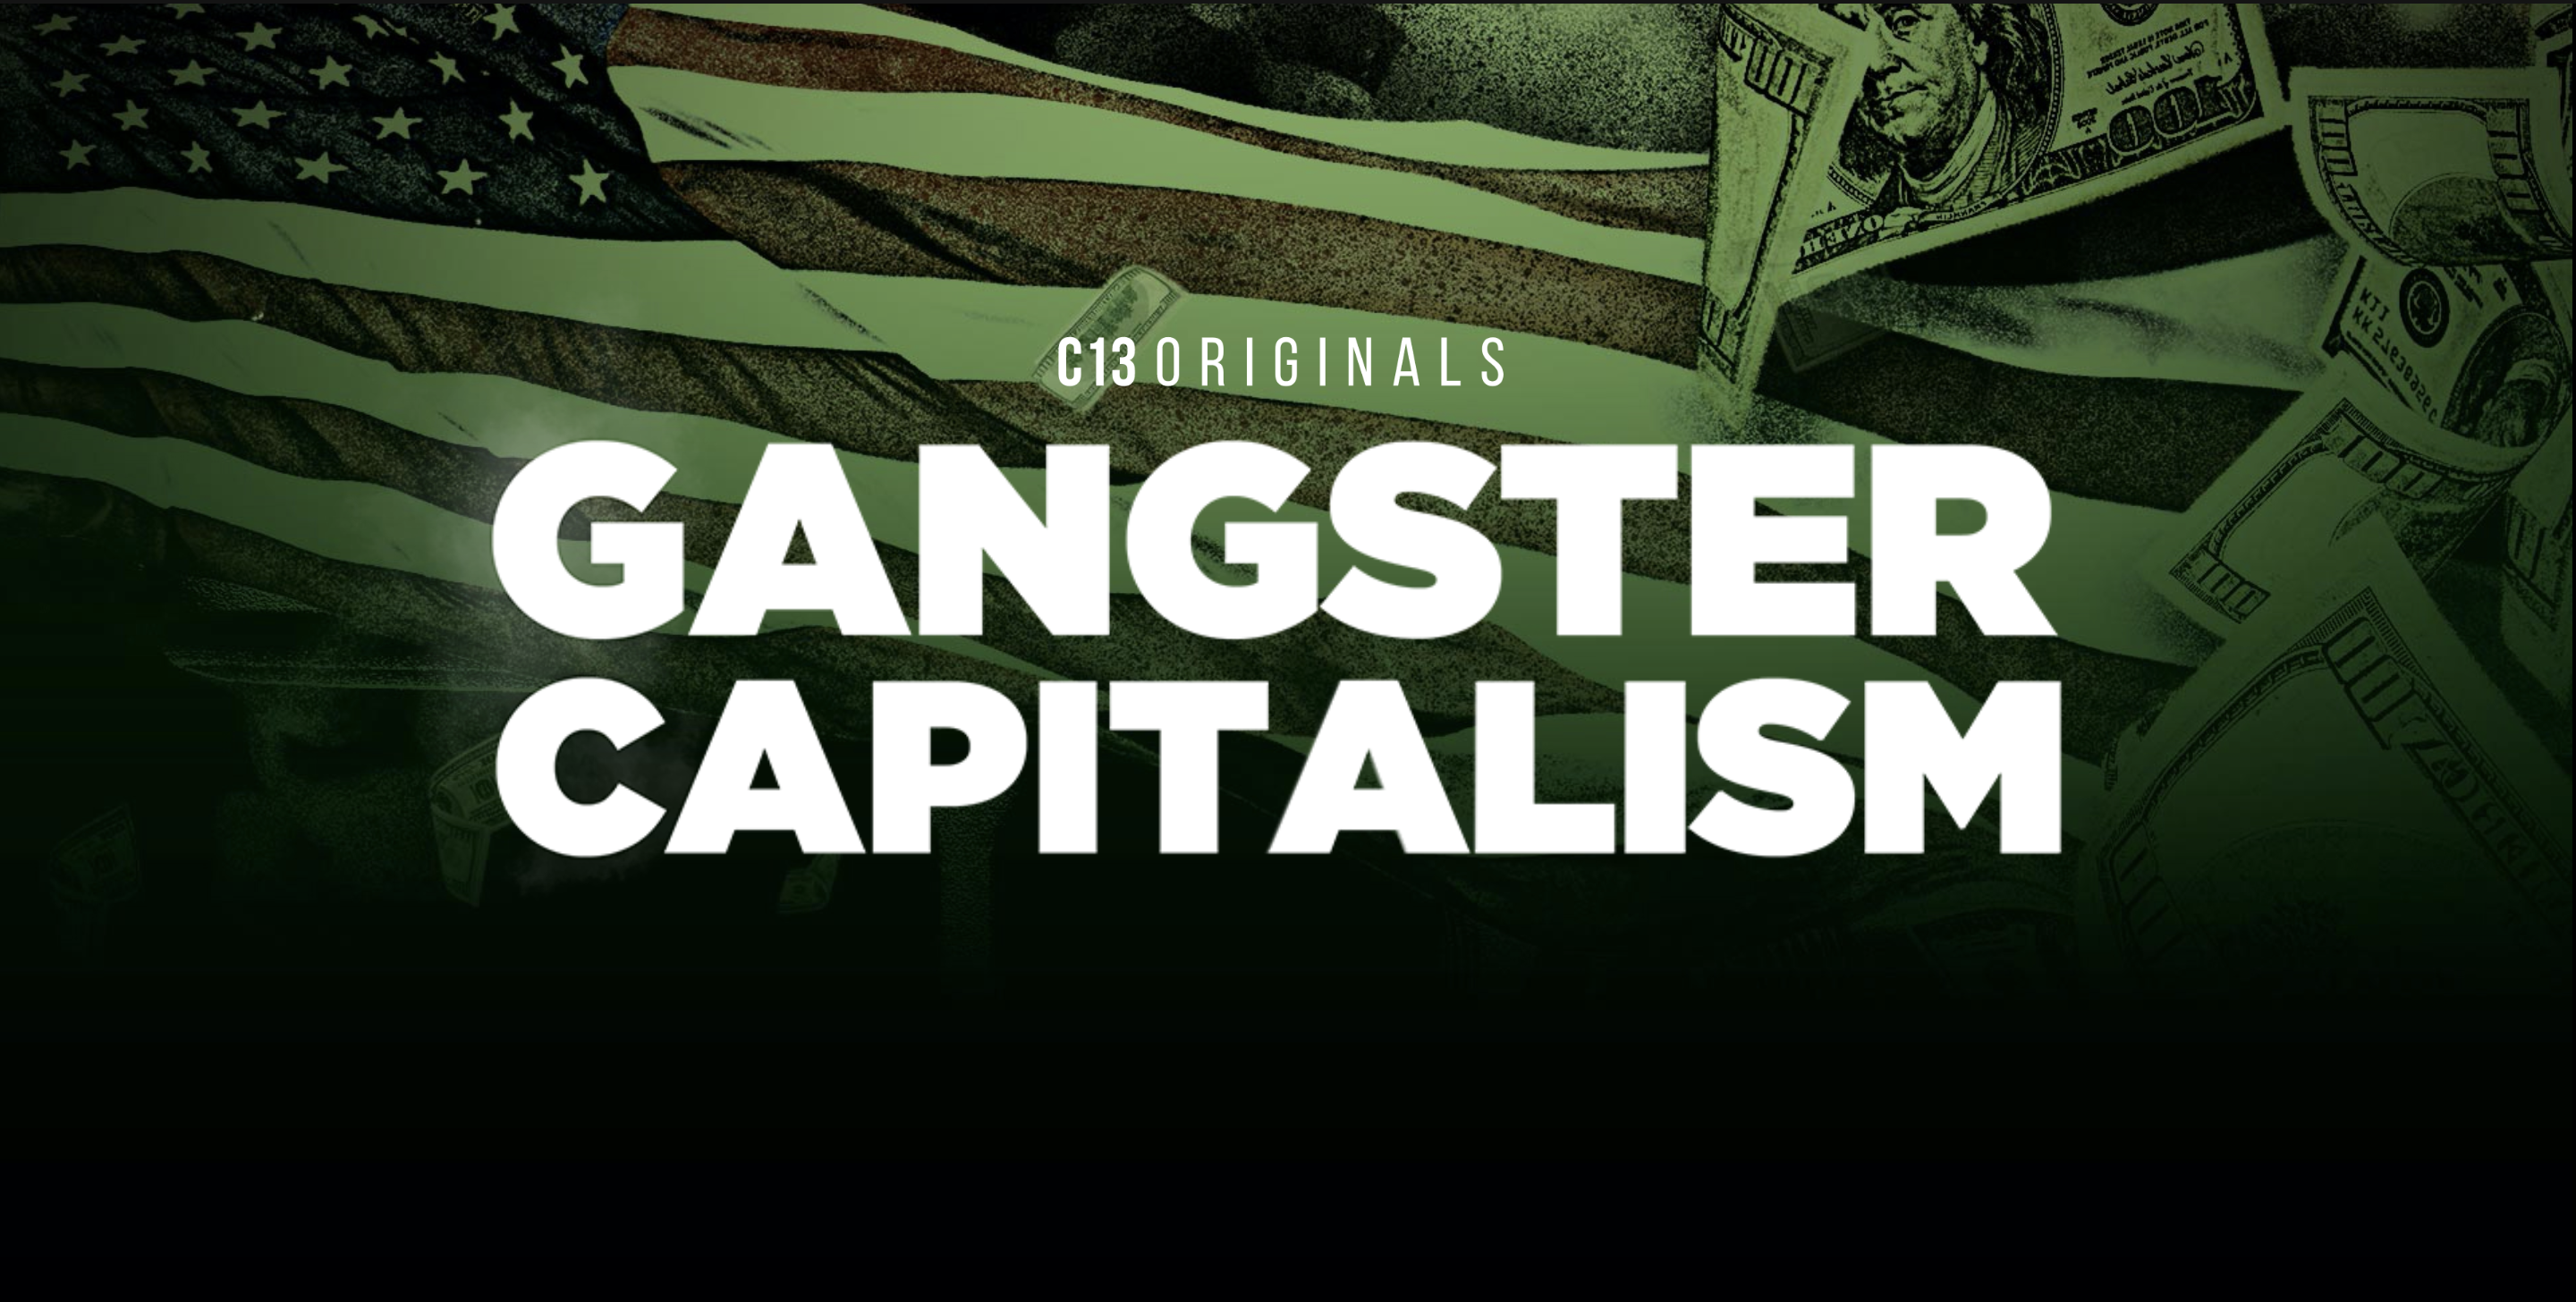 Gangster Capitalism splash logo. Text reads 'C13 Originals, Gangster Capitalism' over a tinted green background of the American flag crumpled dollar bills.